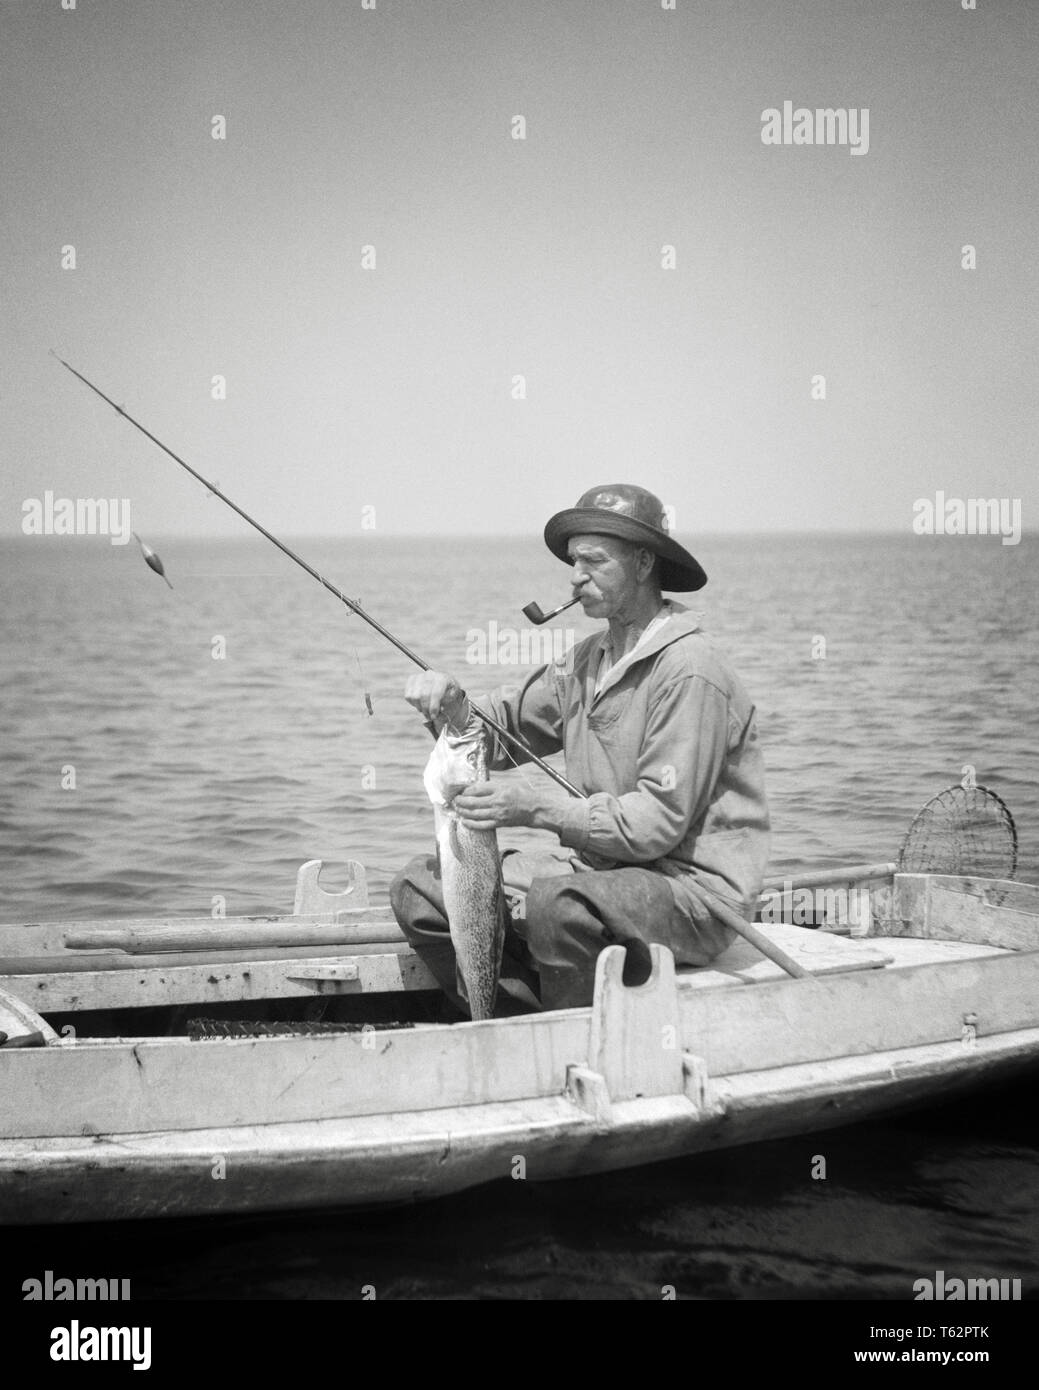 1920s MAN BARNEGAT BAY COMMERCIAL FISHERMAN SITTING IN DUCK BOAT SMOKING PIPE REMOVING FISHHOOK FROM FISH CATCH NEW JERSEY USA - a143 HAR001 HARS B&W MIDDLE-AGED MAN SUCCESS SKILL ACTIVITY AMUSEMENT CANVAS HOBBY INTEREST REMOVING HOBBIES KNOWLEDGE PASTIME PLEASURE NJ OCCUPATIONS DUCK BOAT FISHING ROD NEW JERSEY OLD SALT WAXED OILSKIN RELAXATION AMATEUR BARNEGAT BAY BLACK AND WHITE CAUCASIAN ETHNICITY ENJOYMENT HAR001 OLD FASHIONED Stock Photo